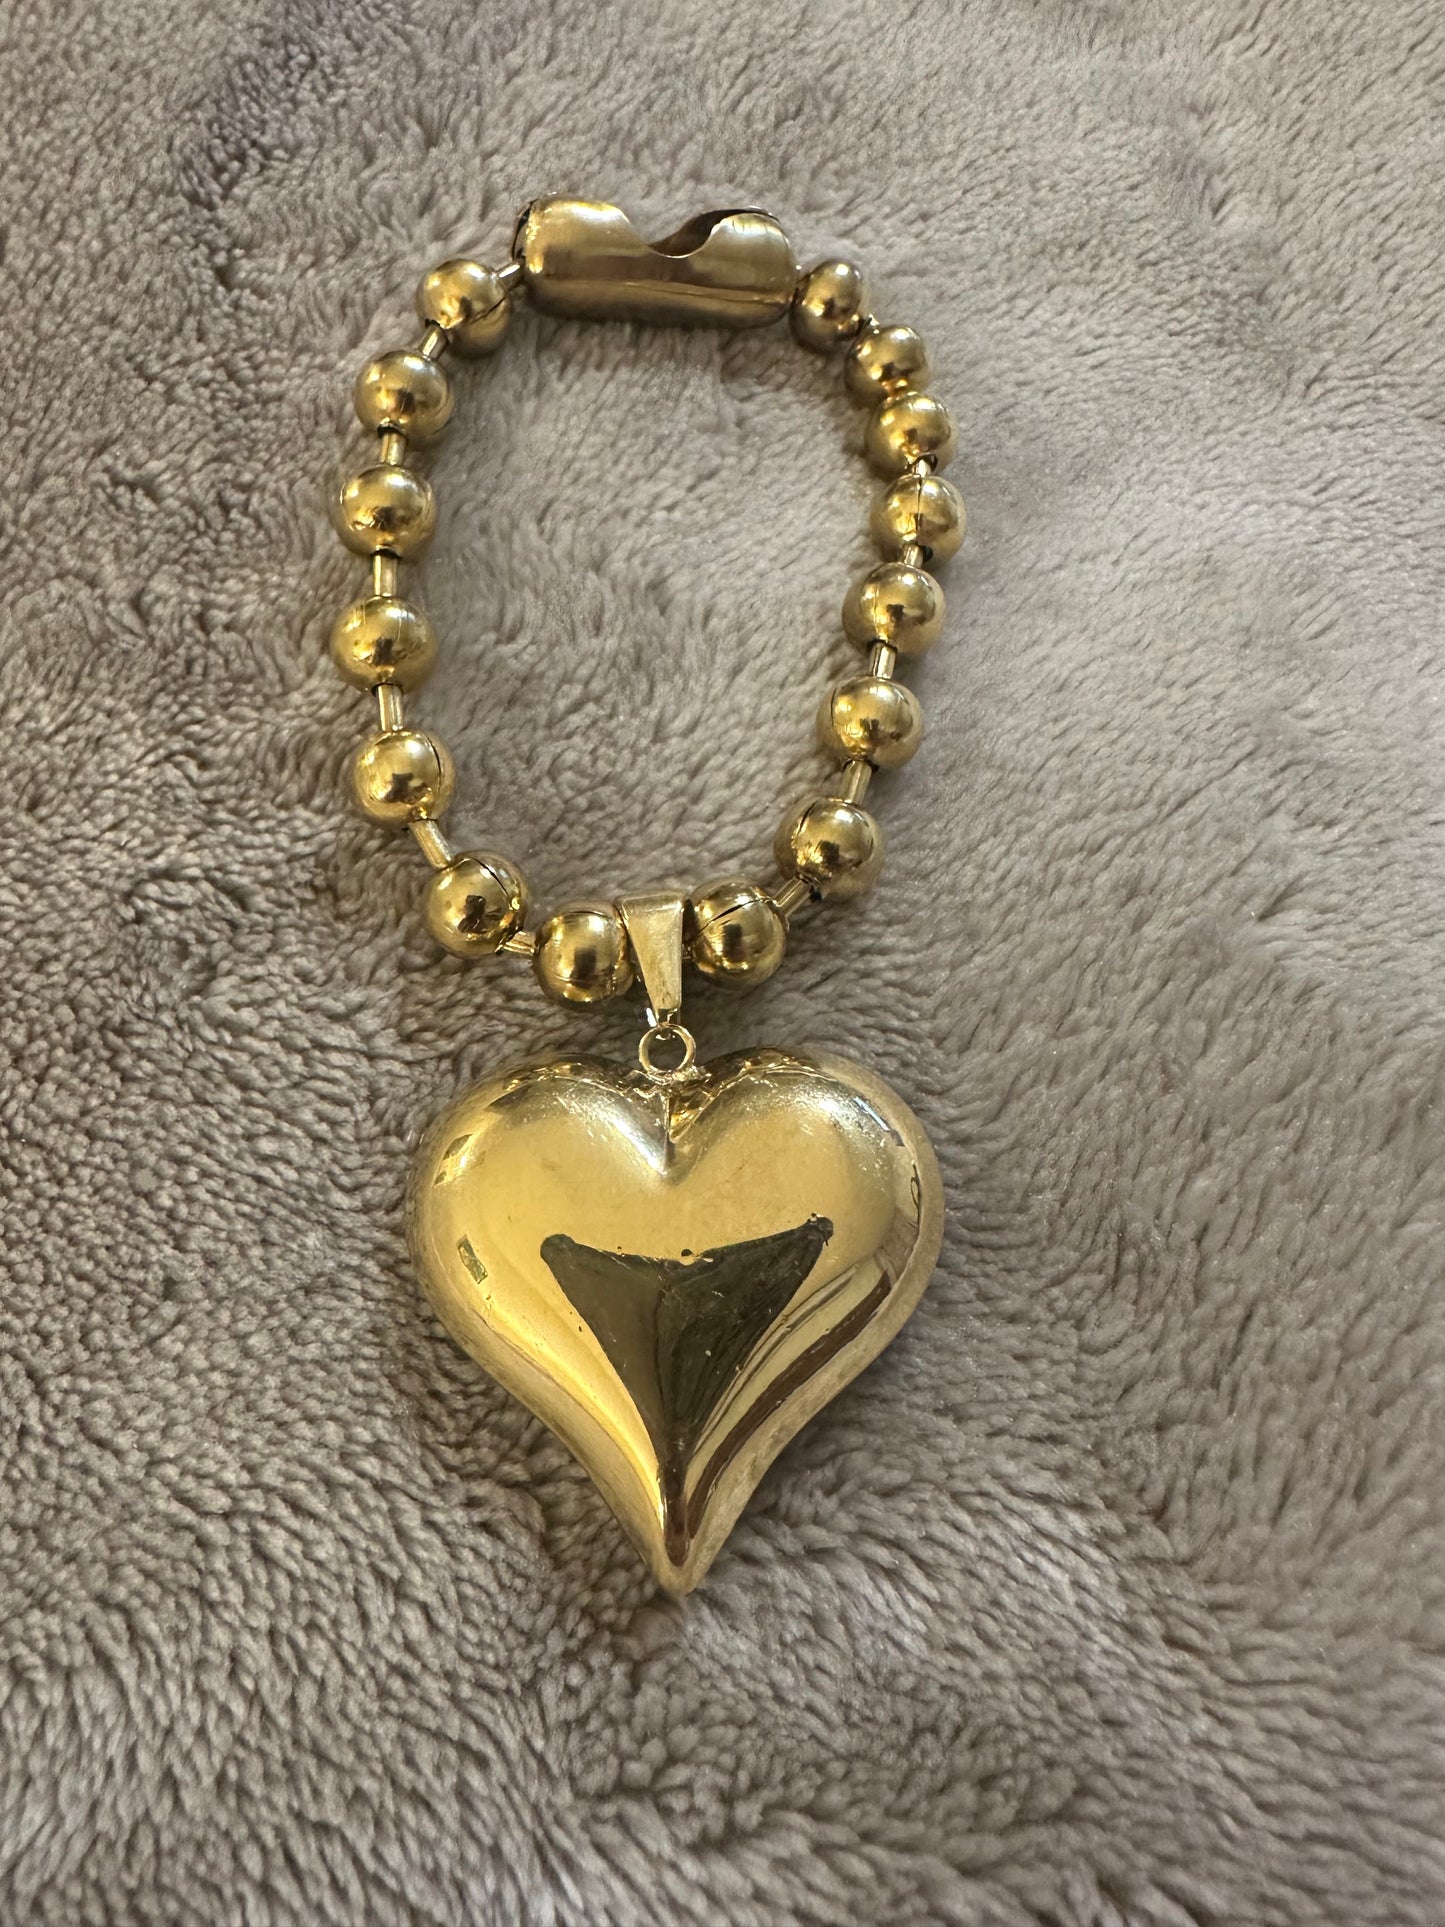 Ball Bracelet and Heart Pendant Color Gold